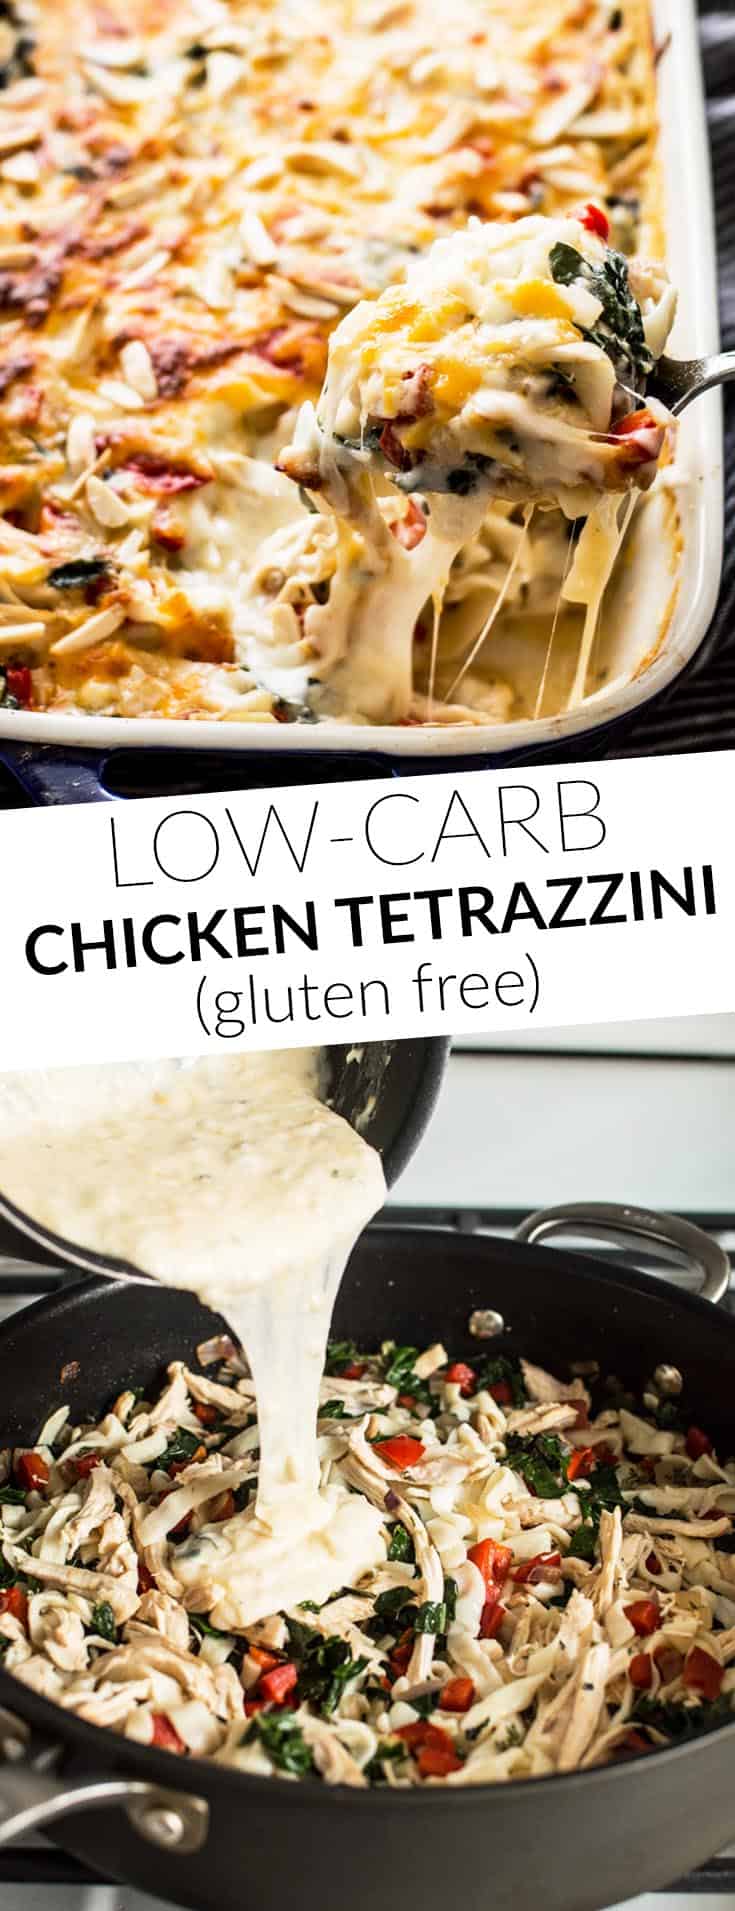 Low Carb Chicken Tetrazzini - this gluten-free cheesy wonder uses tofu shirataki noodles instead of pasta! by @healthynibs